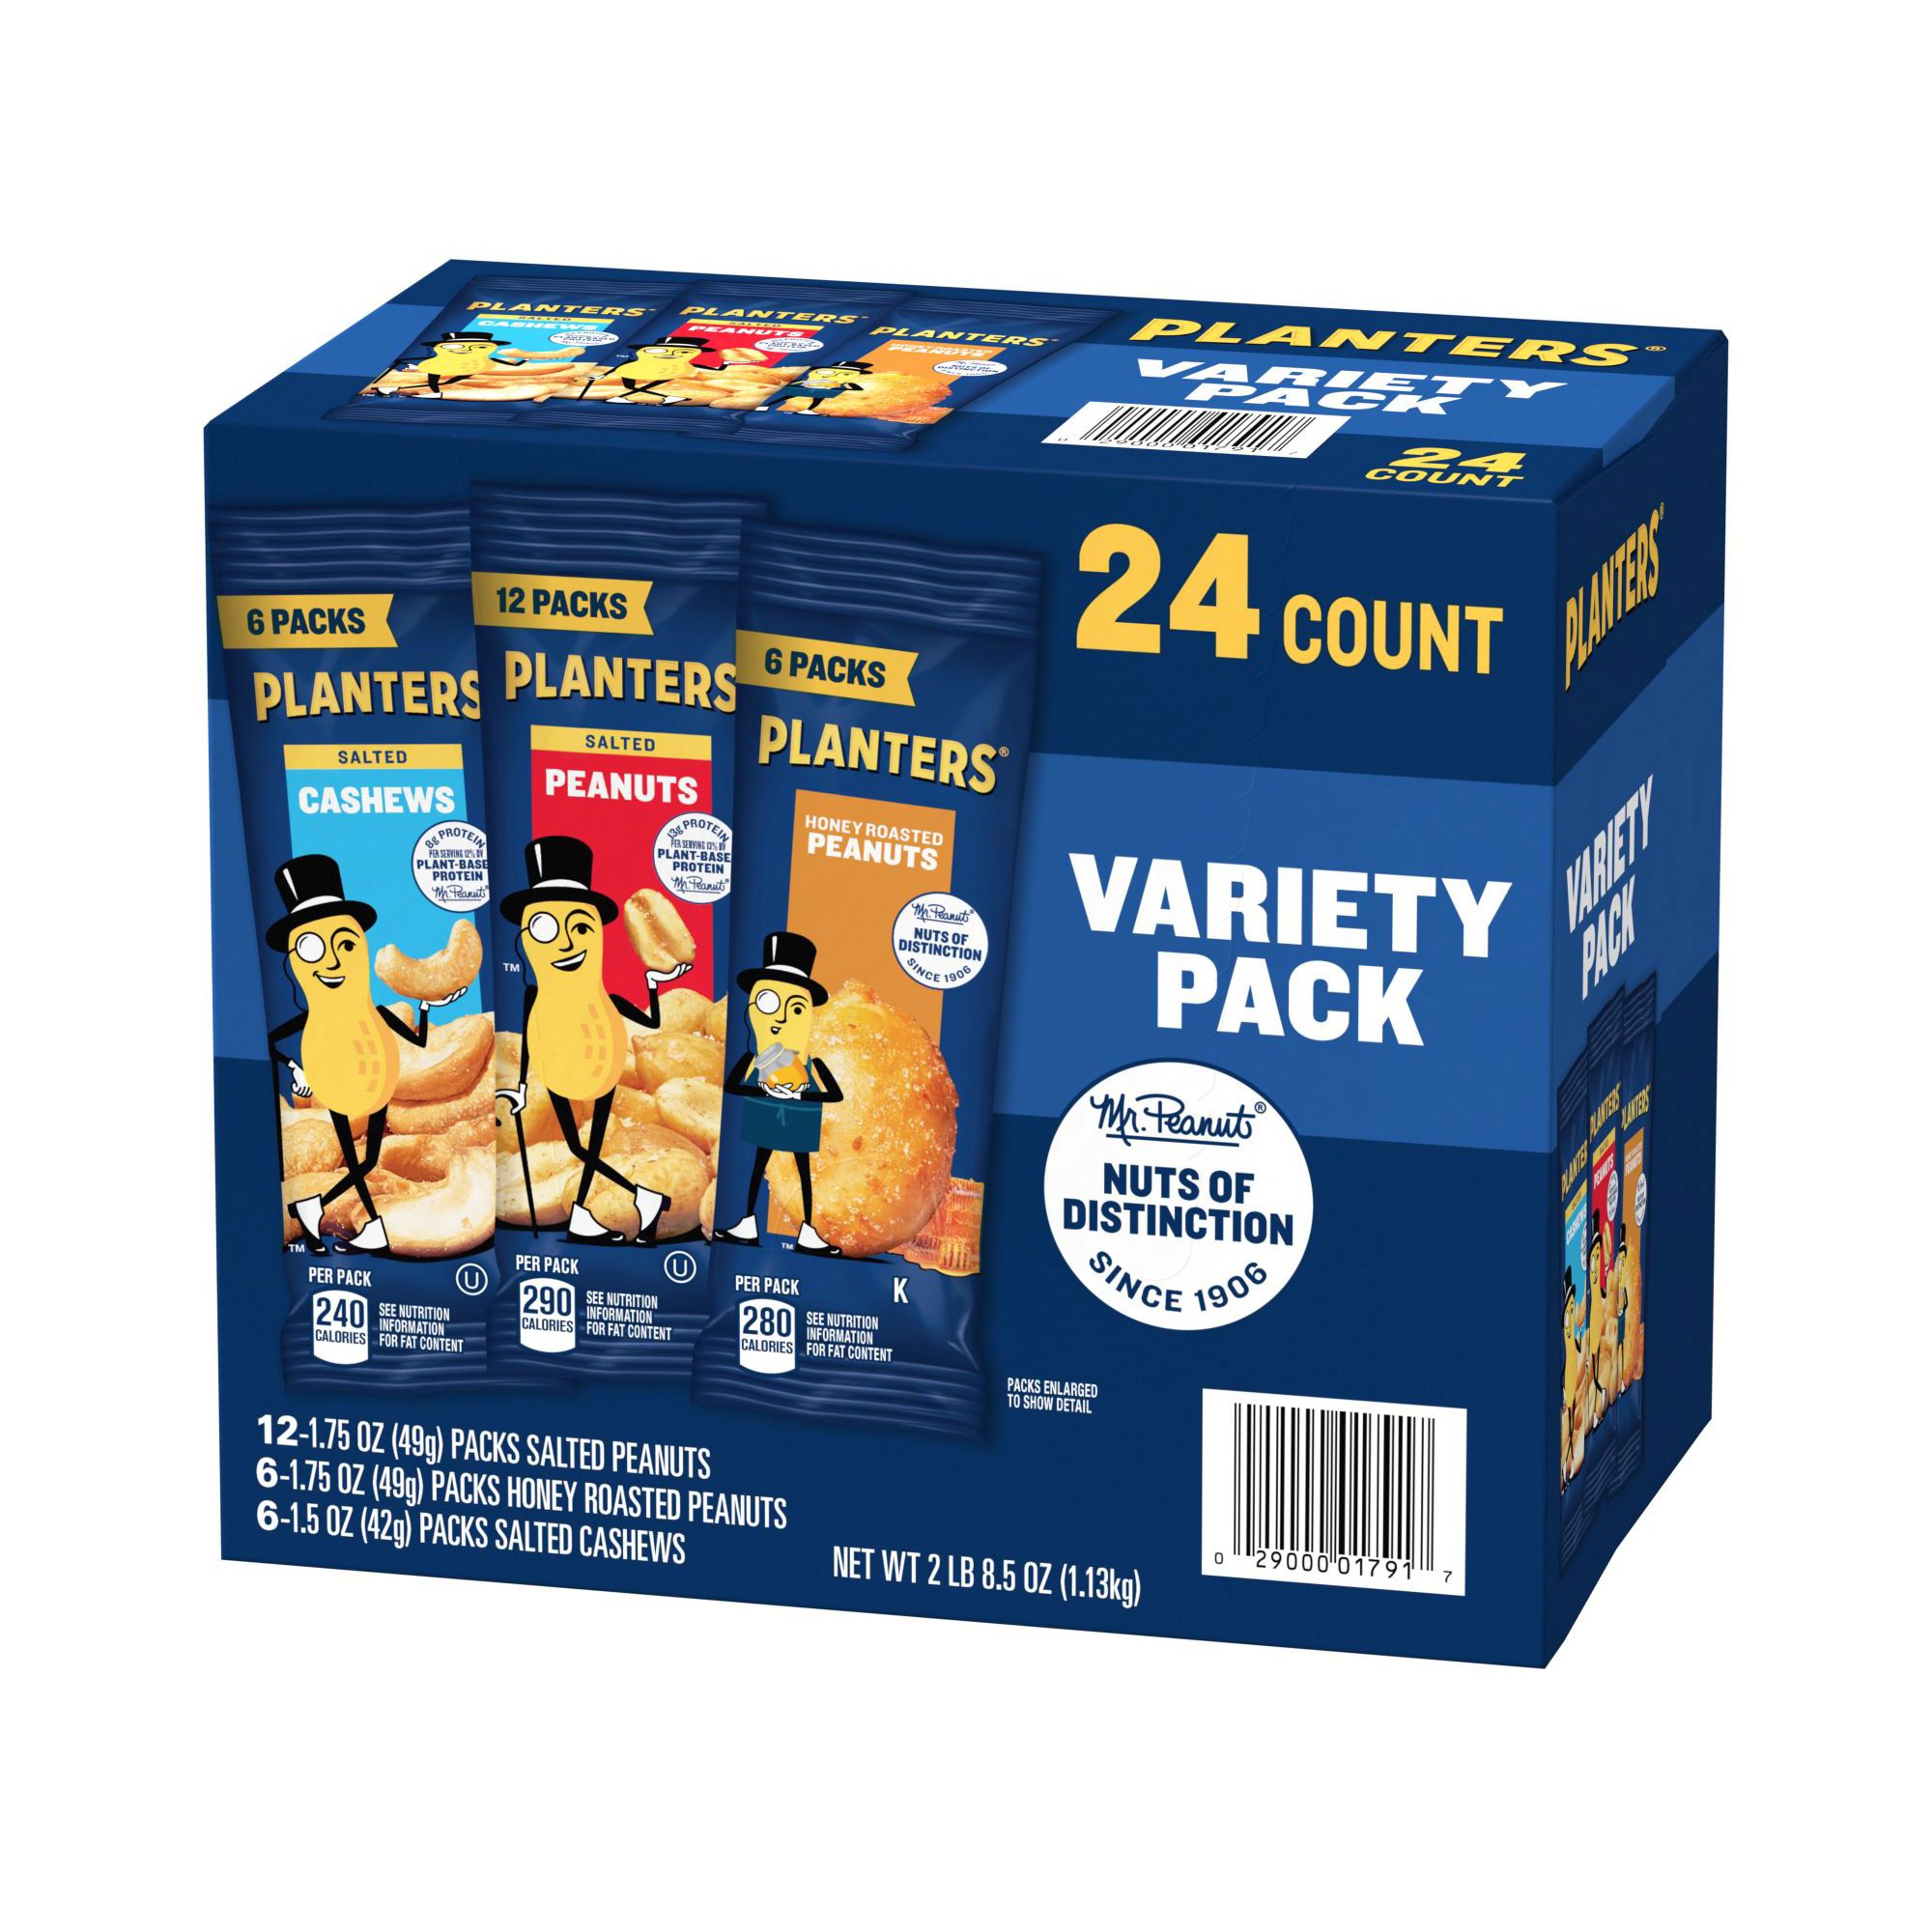 Snack Honey Roasted Mixed Nuts with Peanuts, 24 Ounces, Peanuts